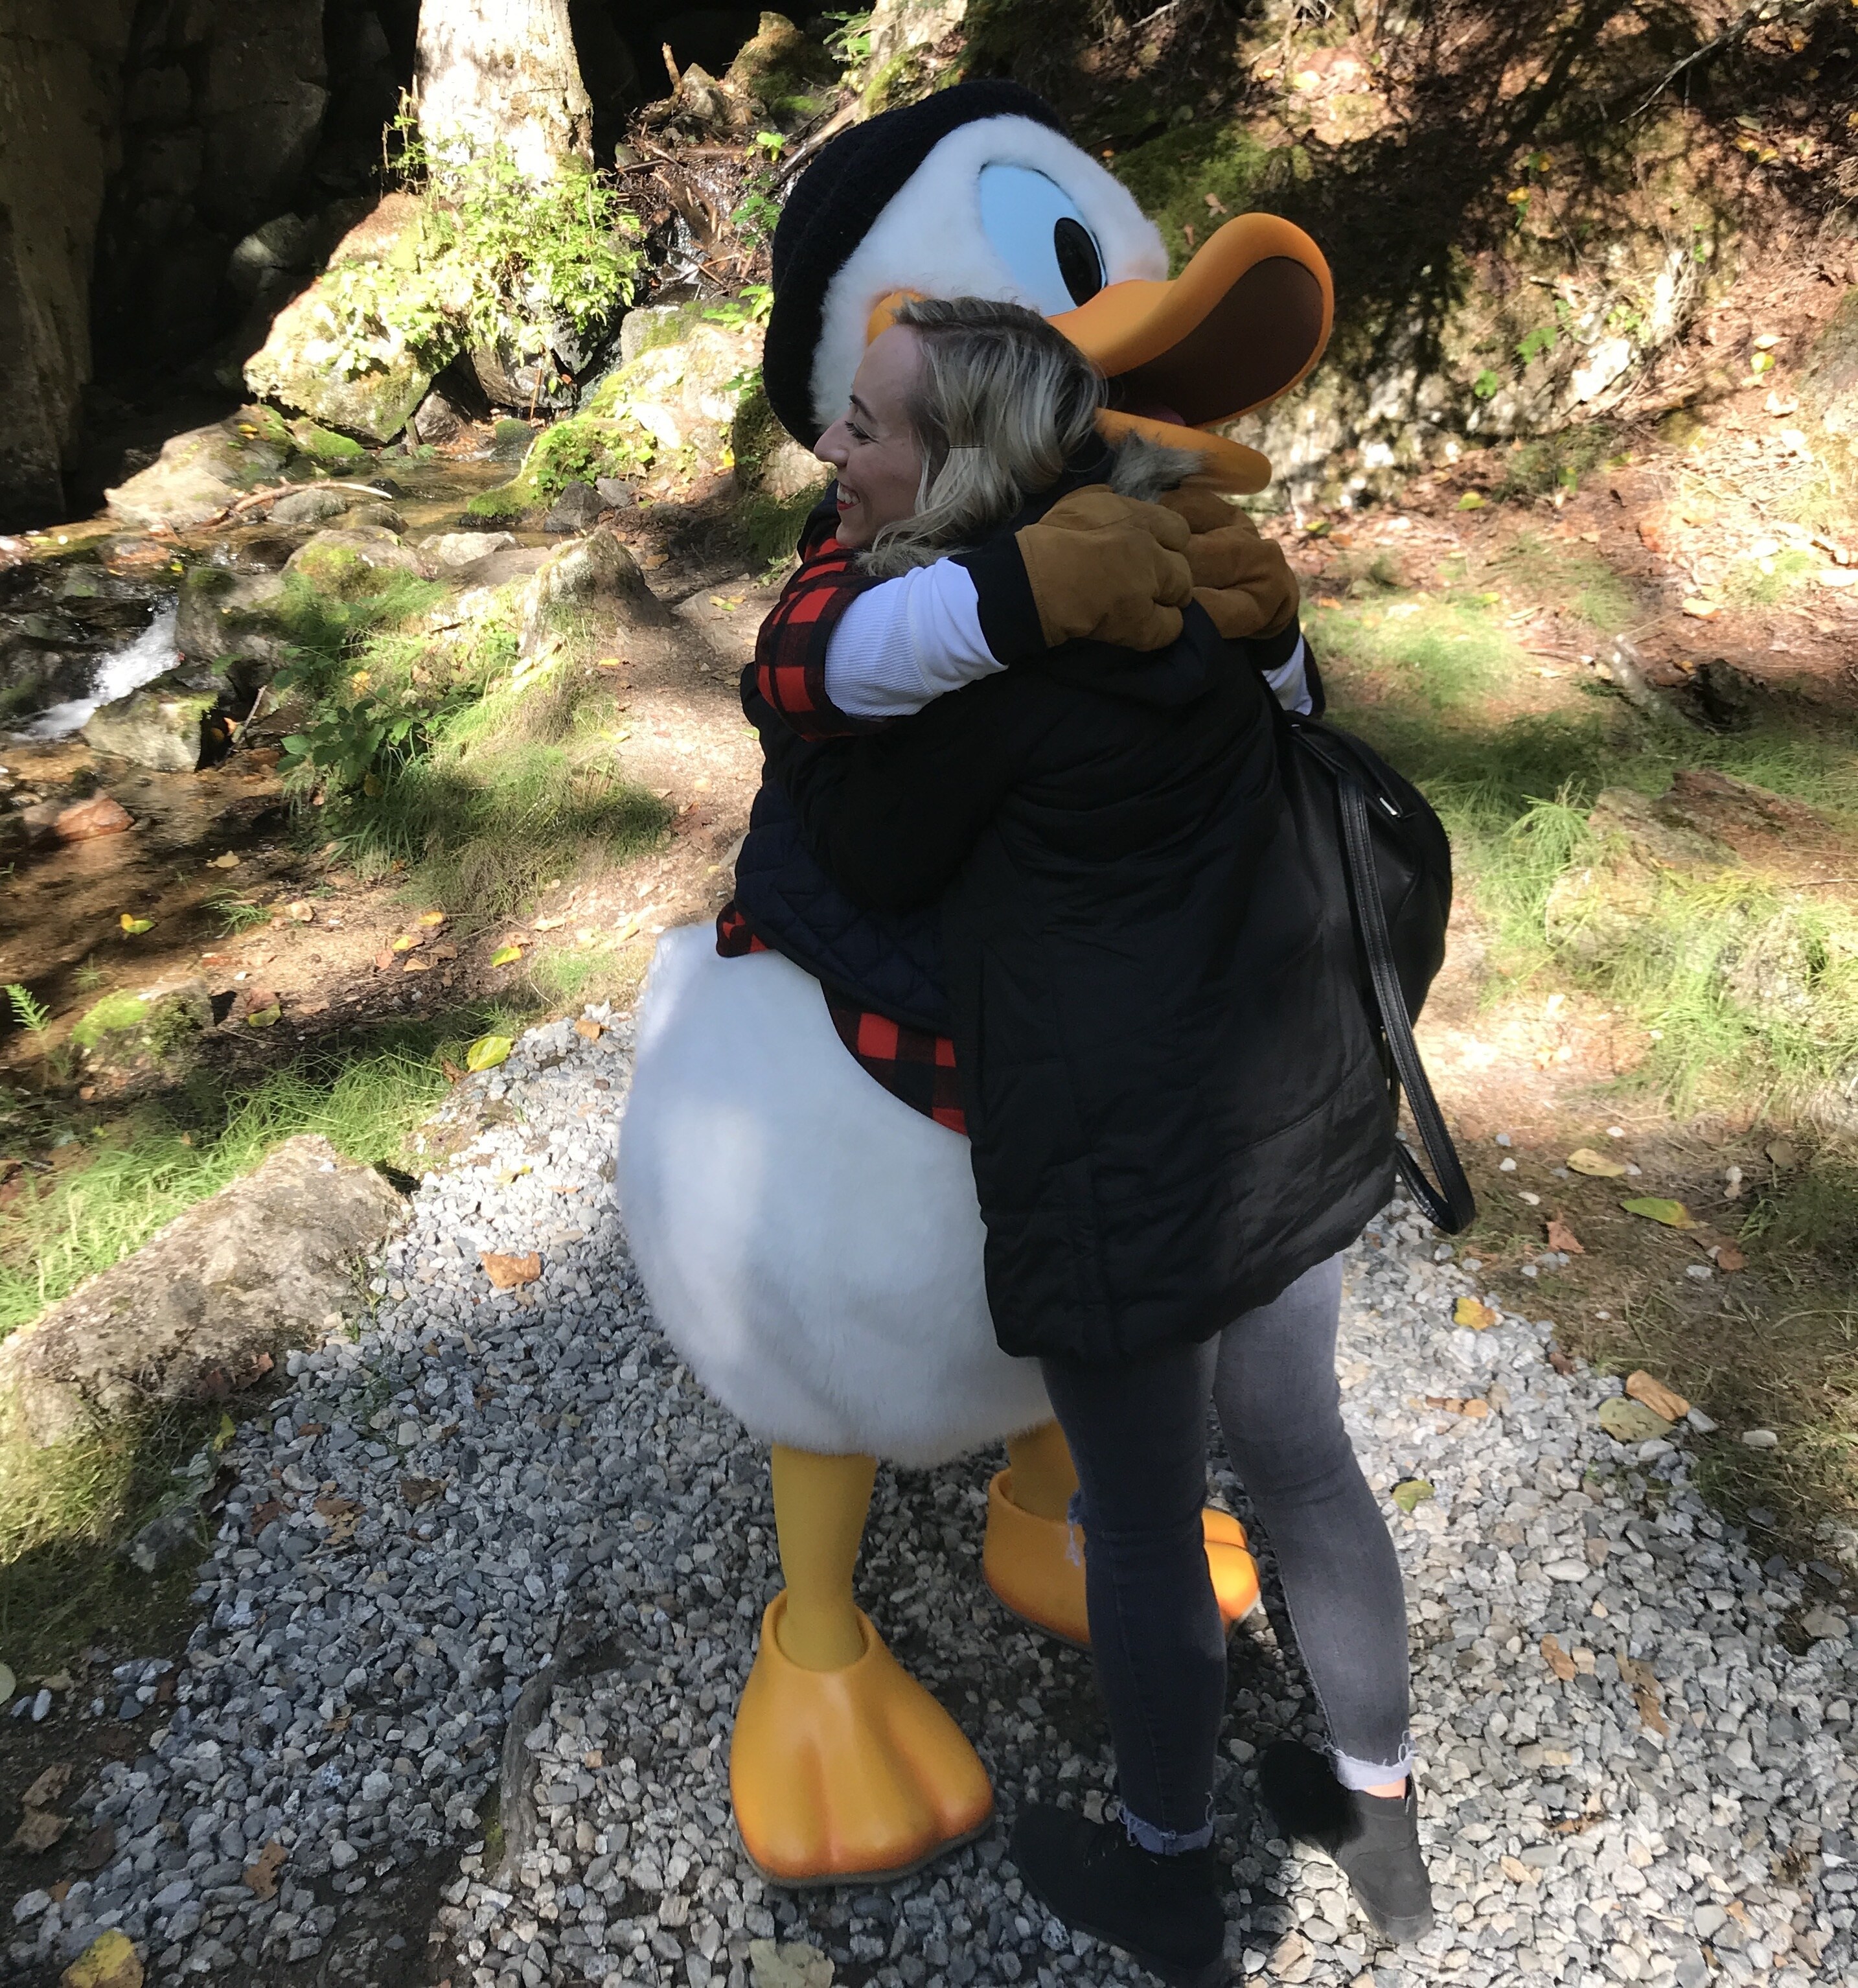 Donald Duck and Oh My Disney Host Michelle Lema Greeting During the Liarsville Excursion in Skagway on the Disney Wonder Alaska Cruise